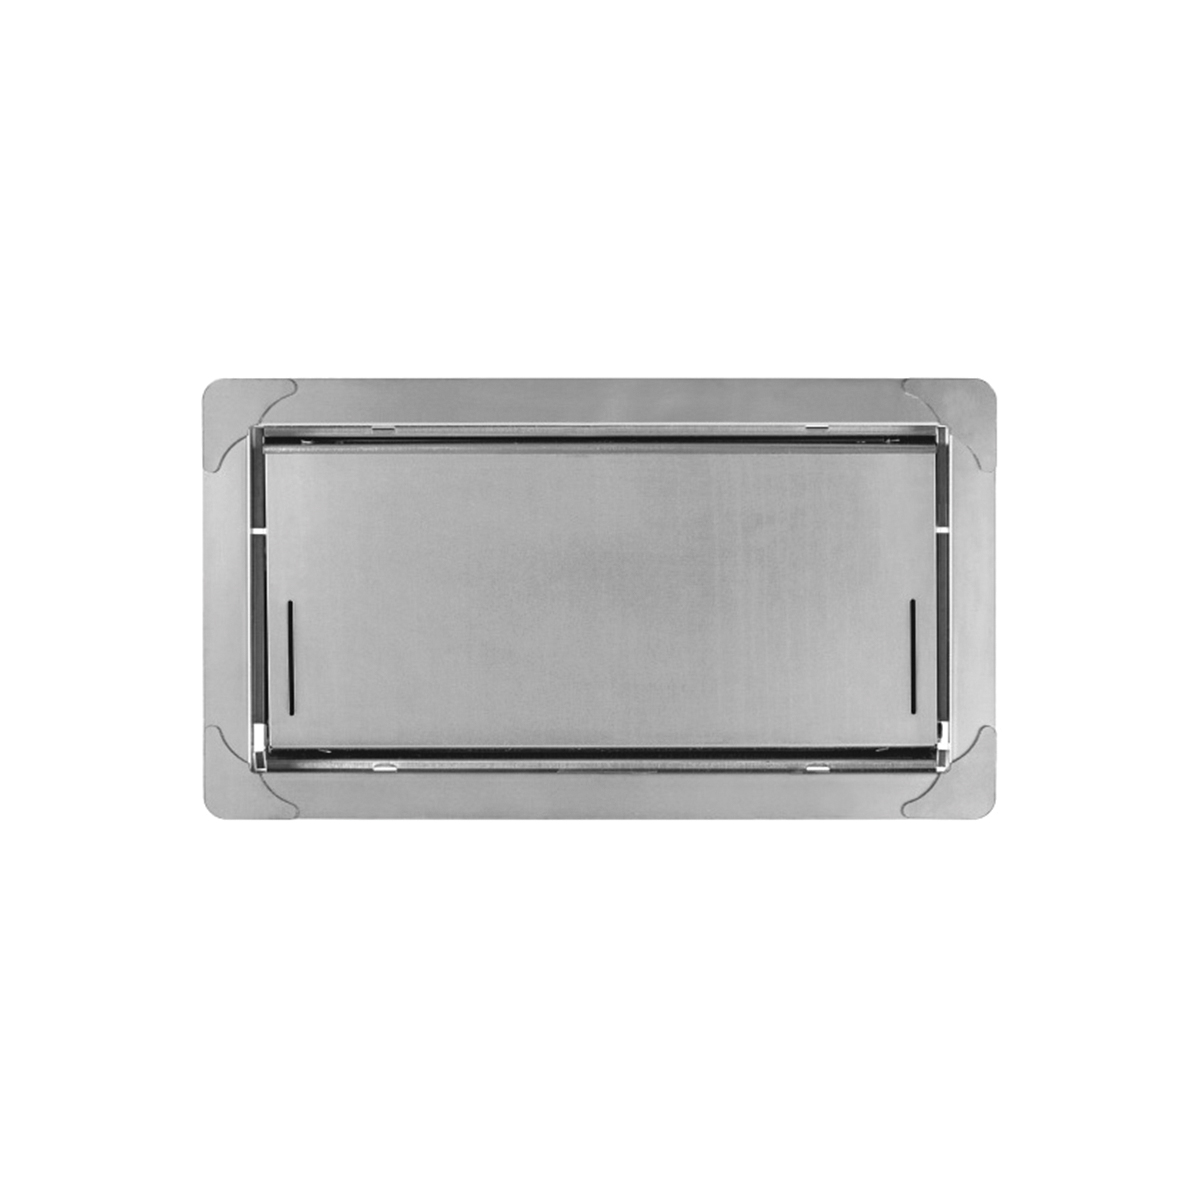 1540-520 Insulated Flood Vent, 16 in W, 8 in H, 200 sq-ft Net Free Ventilating Area, Stainless Steel